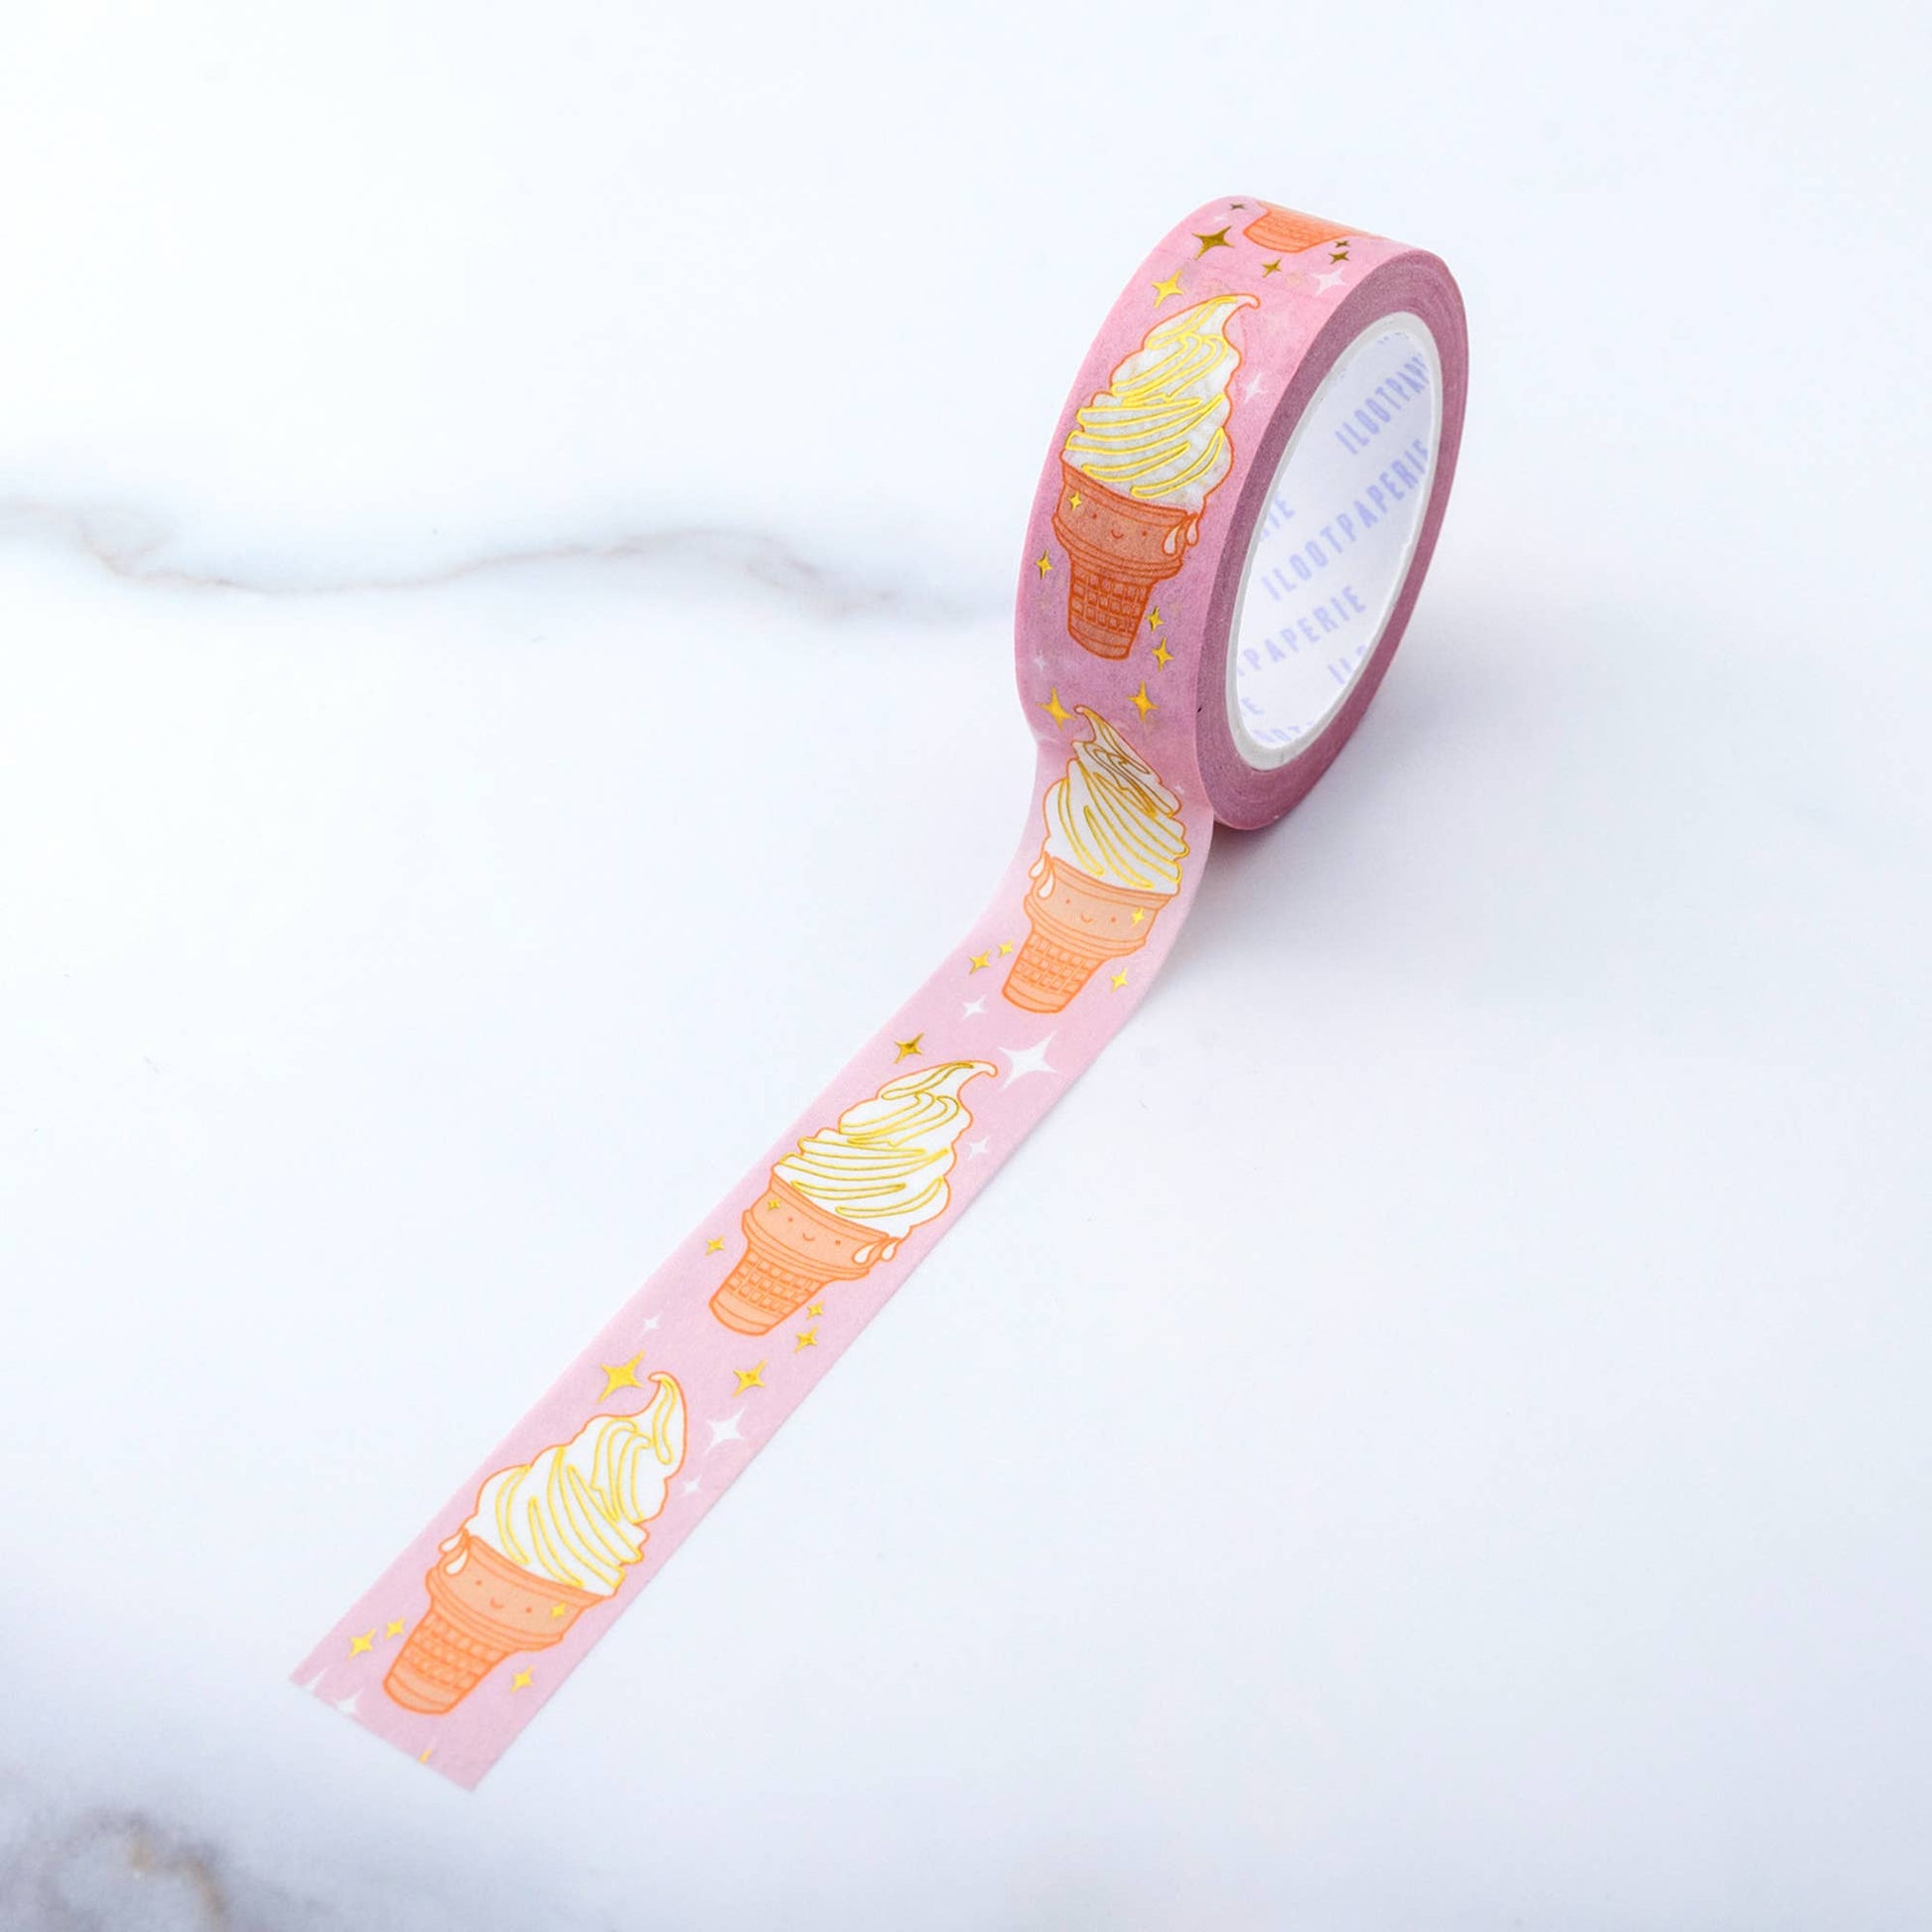 Washi tape with a vanilla soft serve swirl on a cake cone with a happy face. Gold foiled motifs.